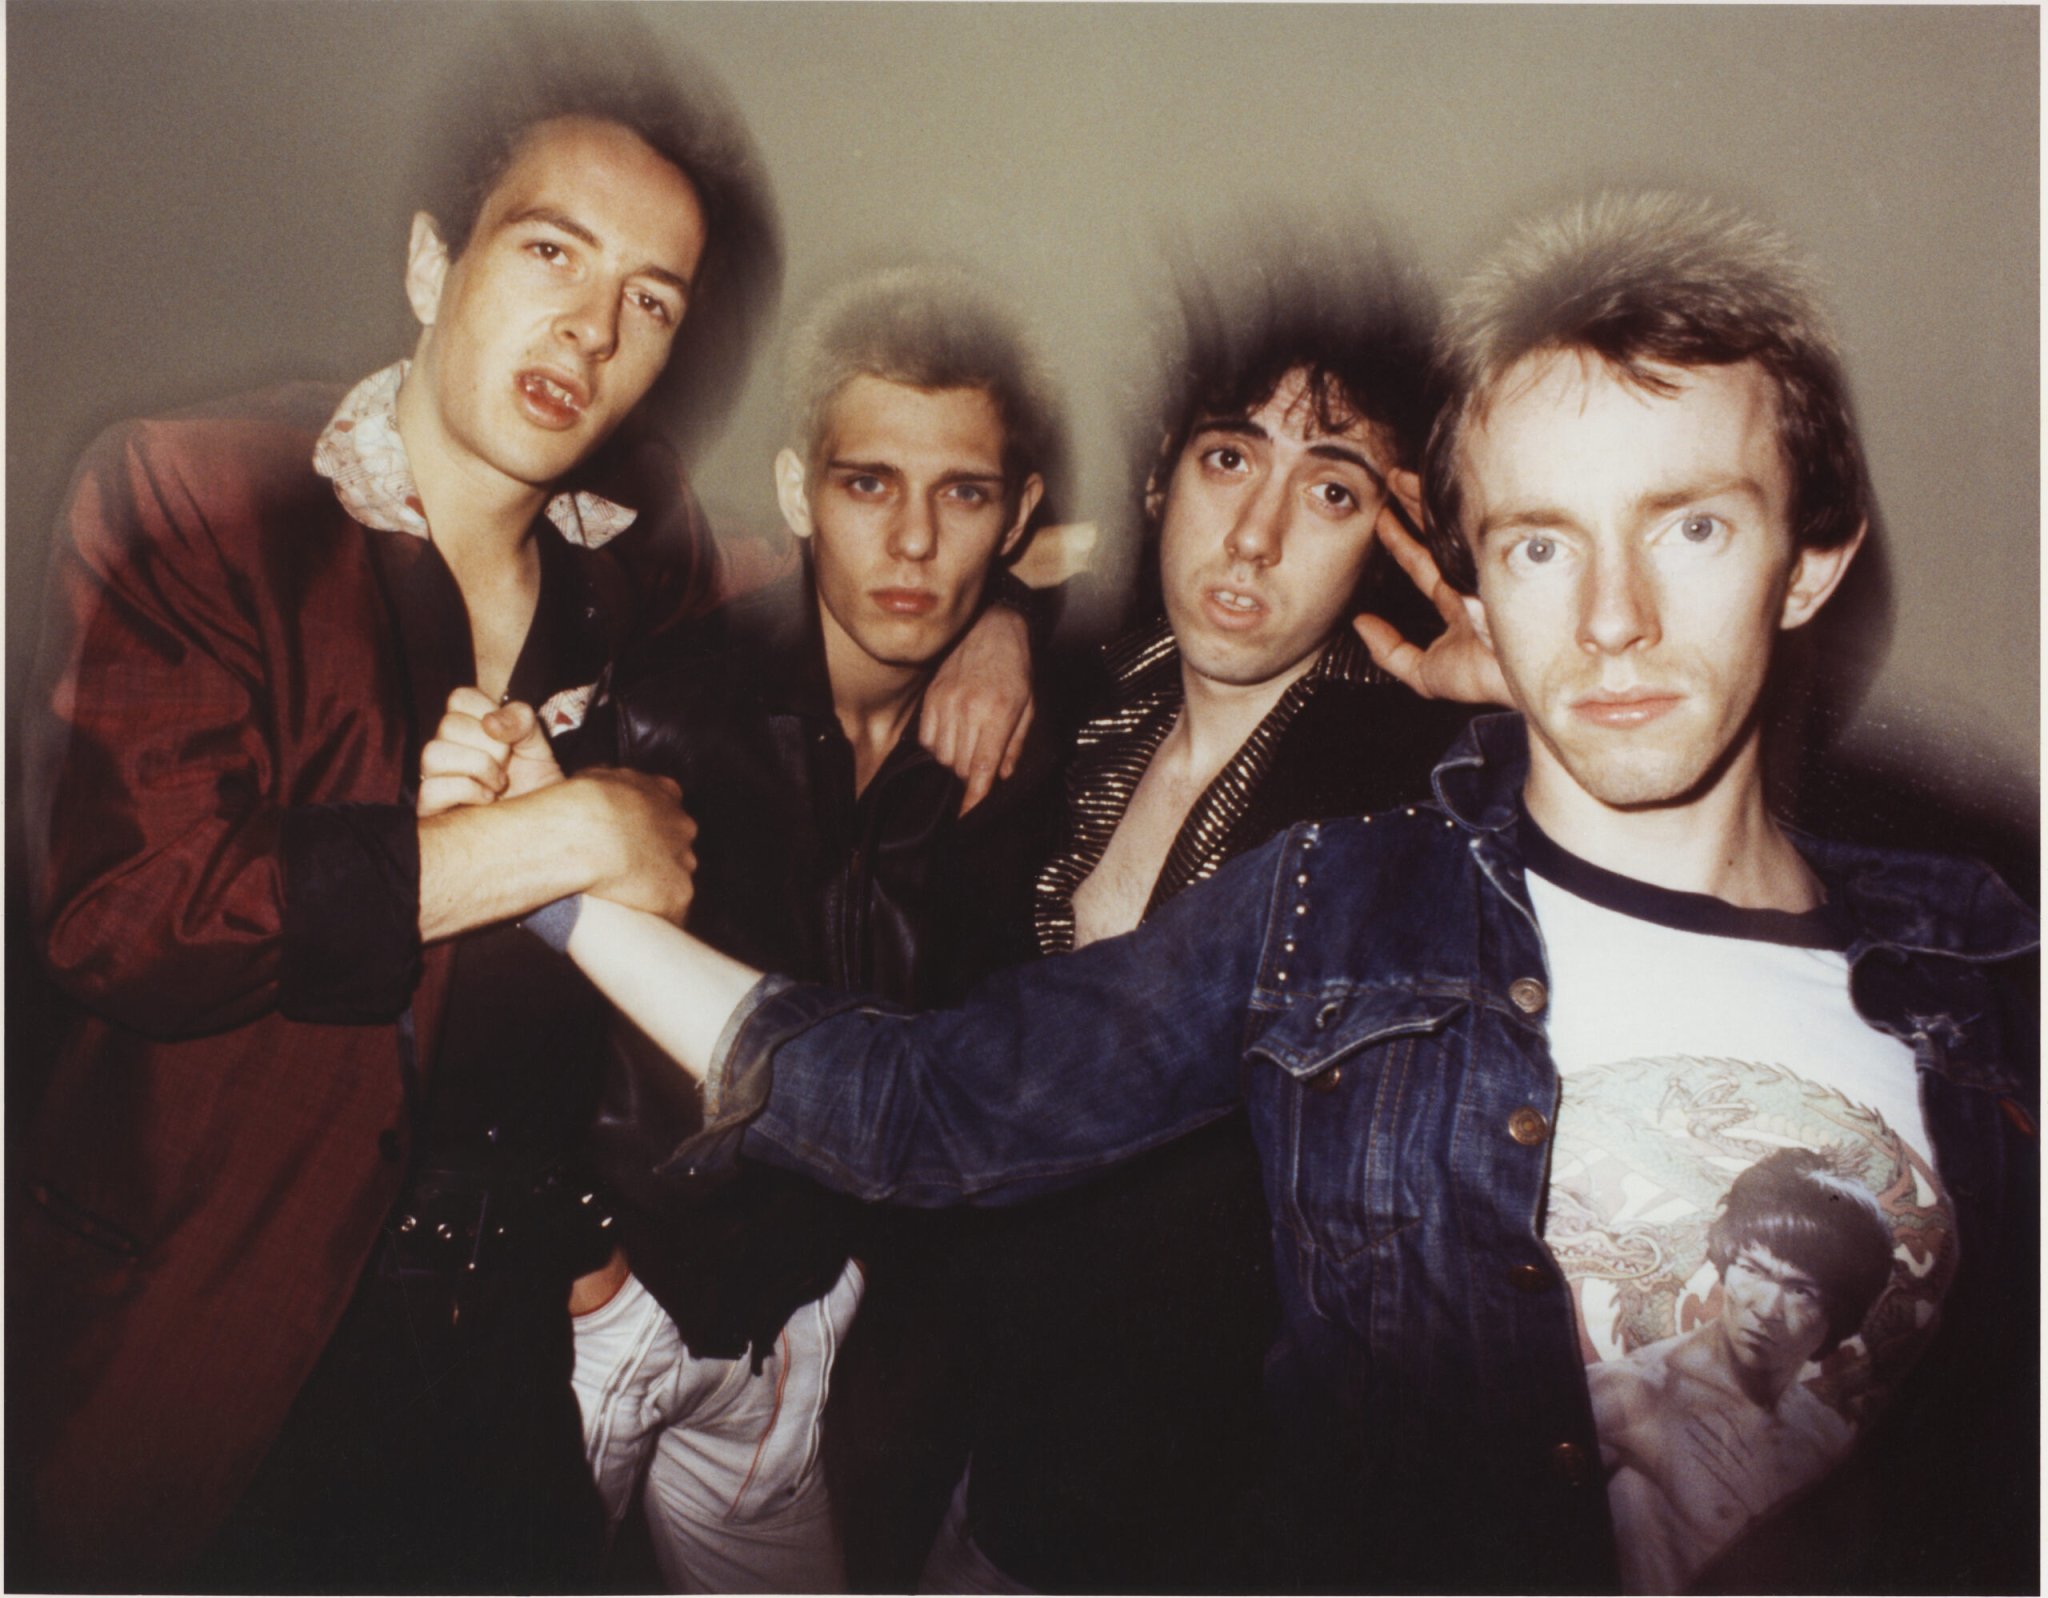 Every Album by the Clash, Ranked - SPIN